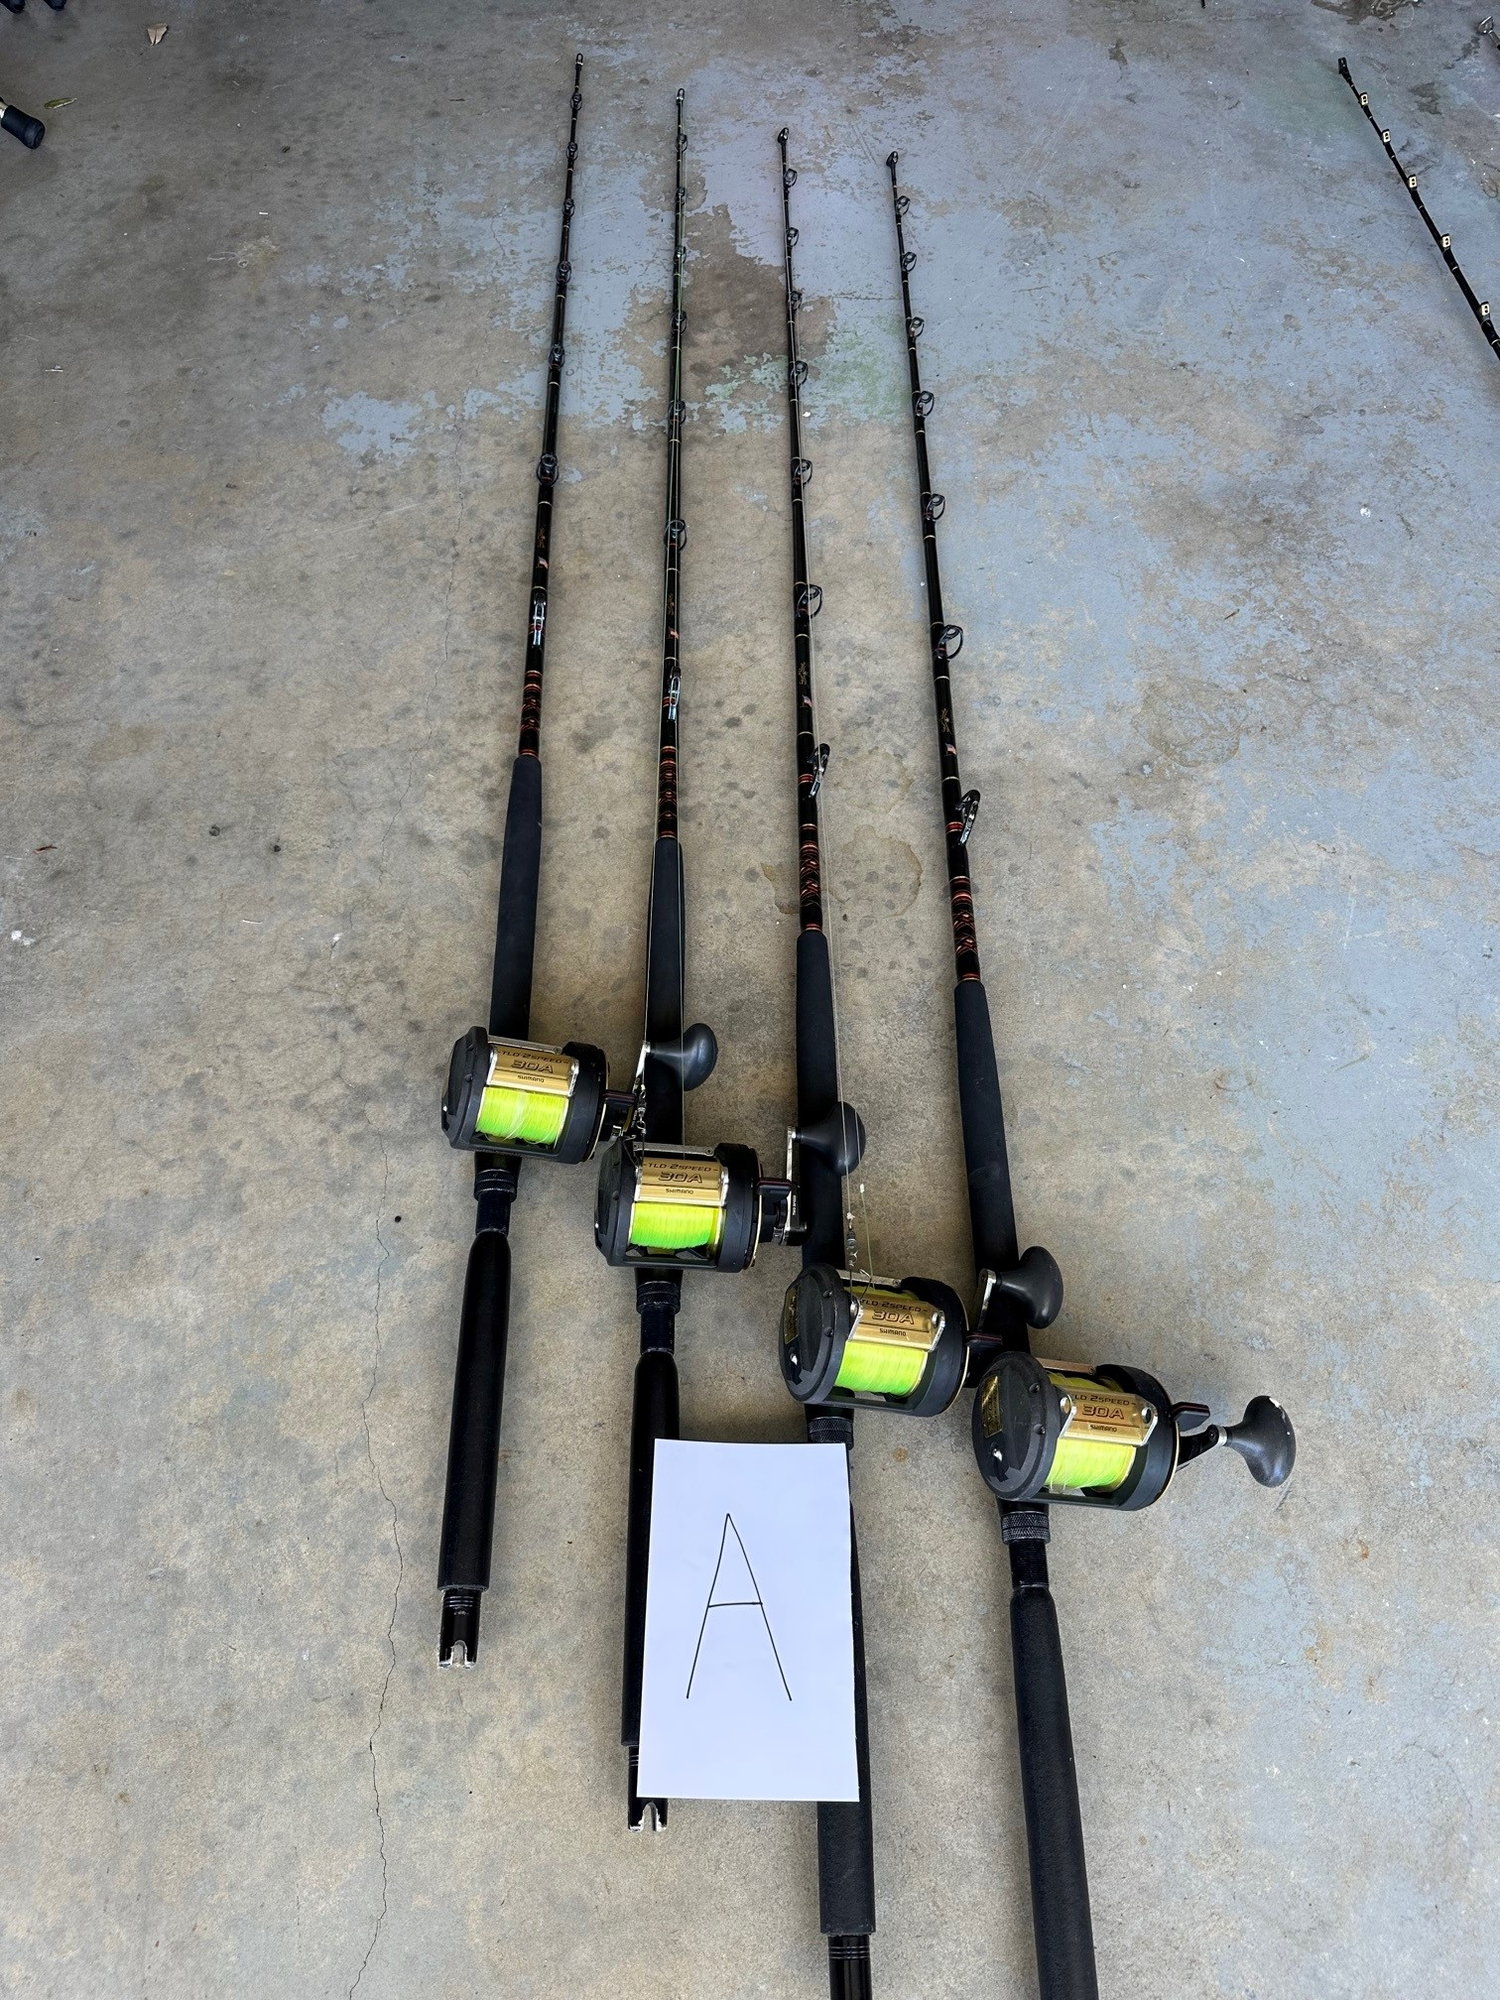 FOR SALE: Rods, Reels, Gear - The Hull Truth - Boating and Fishing Forum